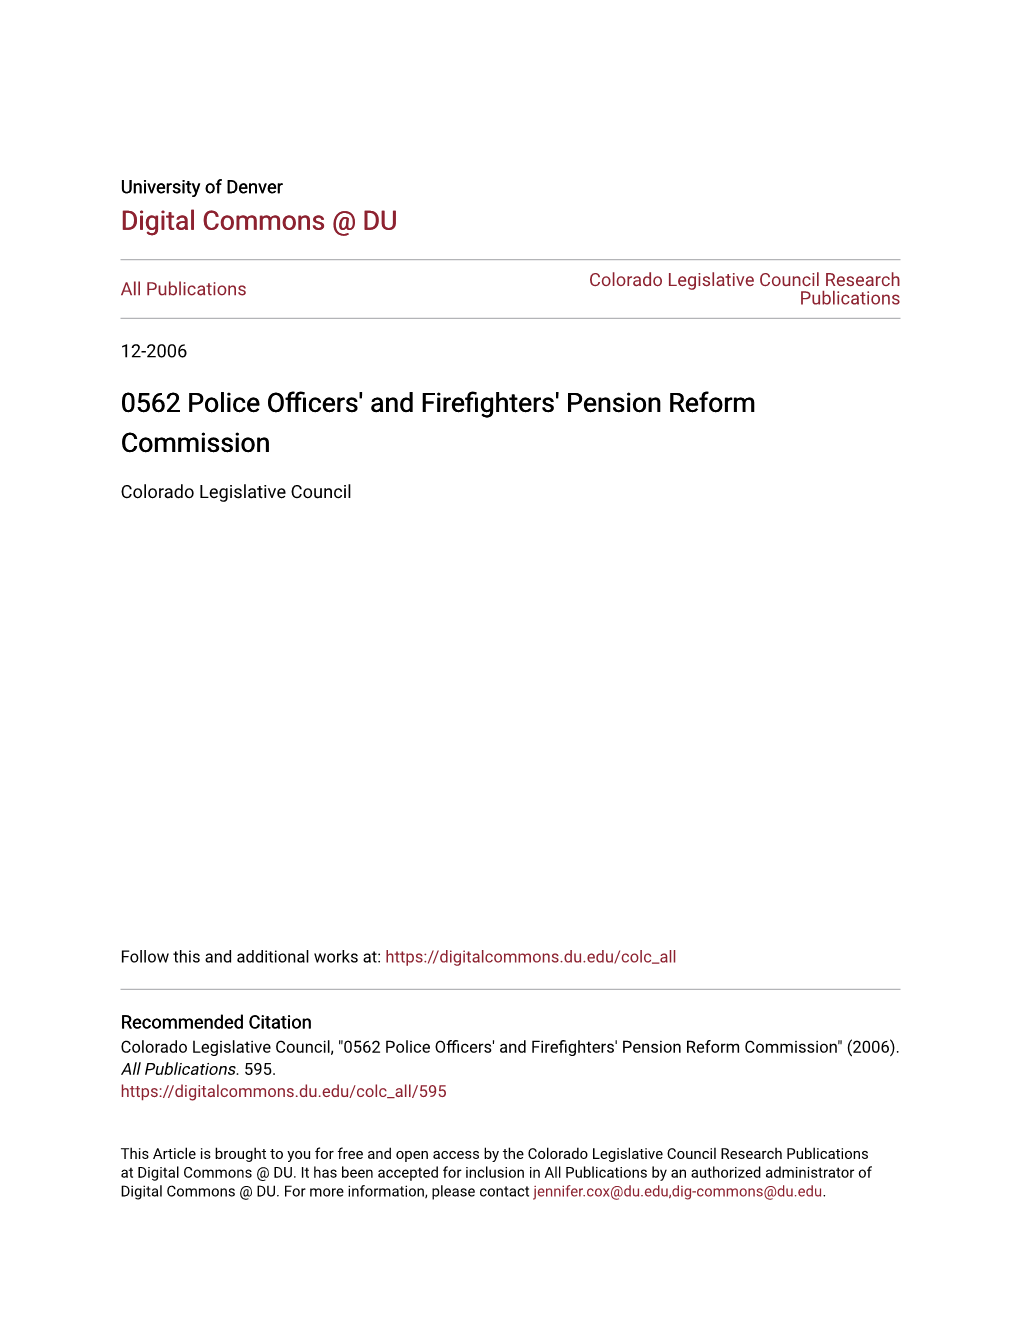 0562 Police Officers' and Firefighters' Pension Reform Commission